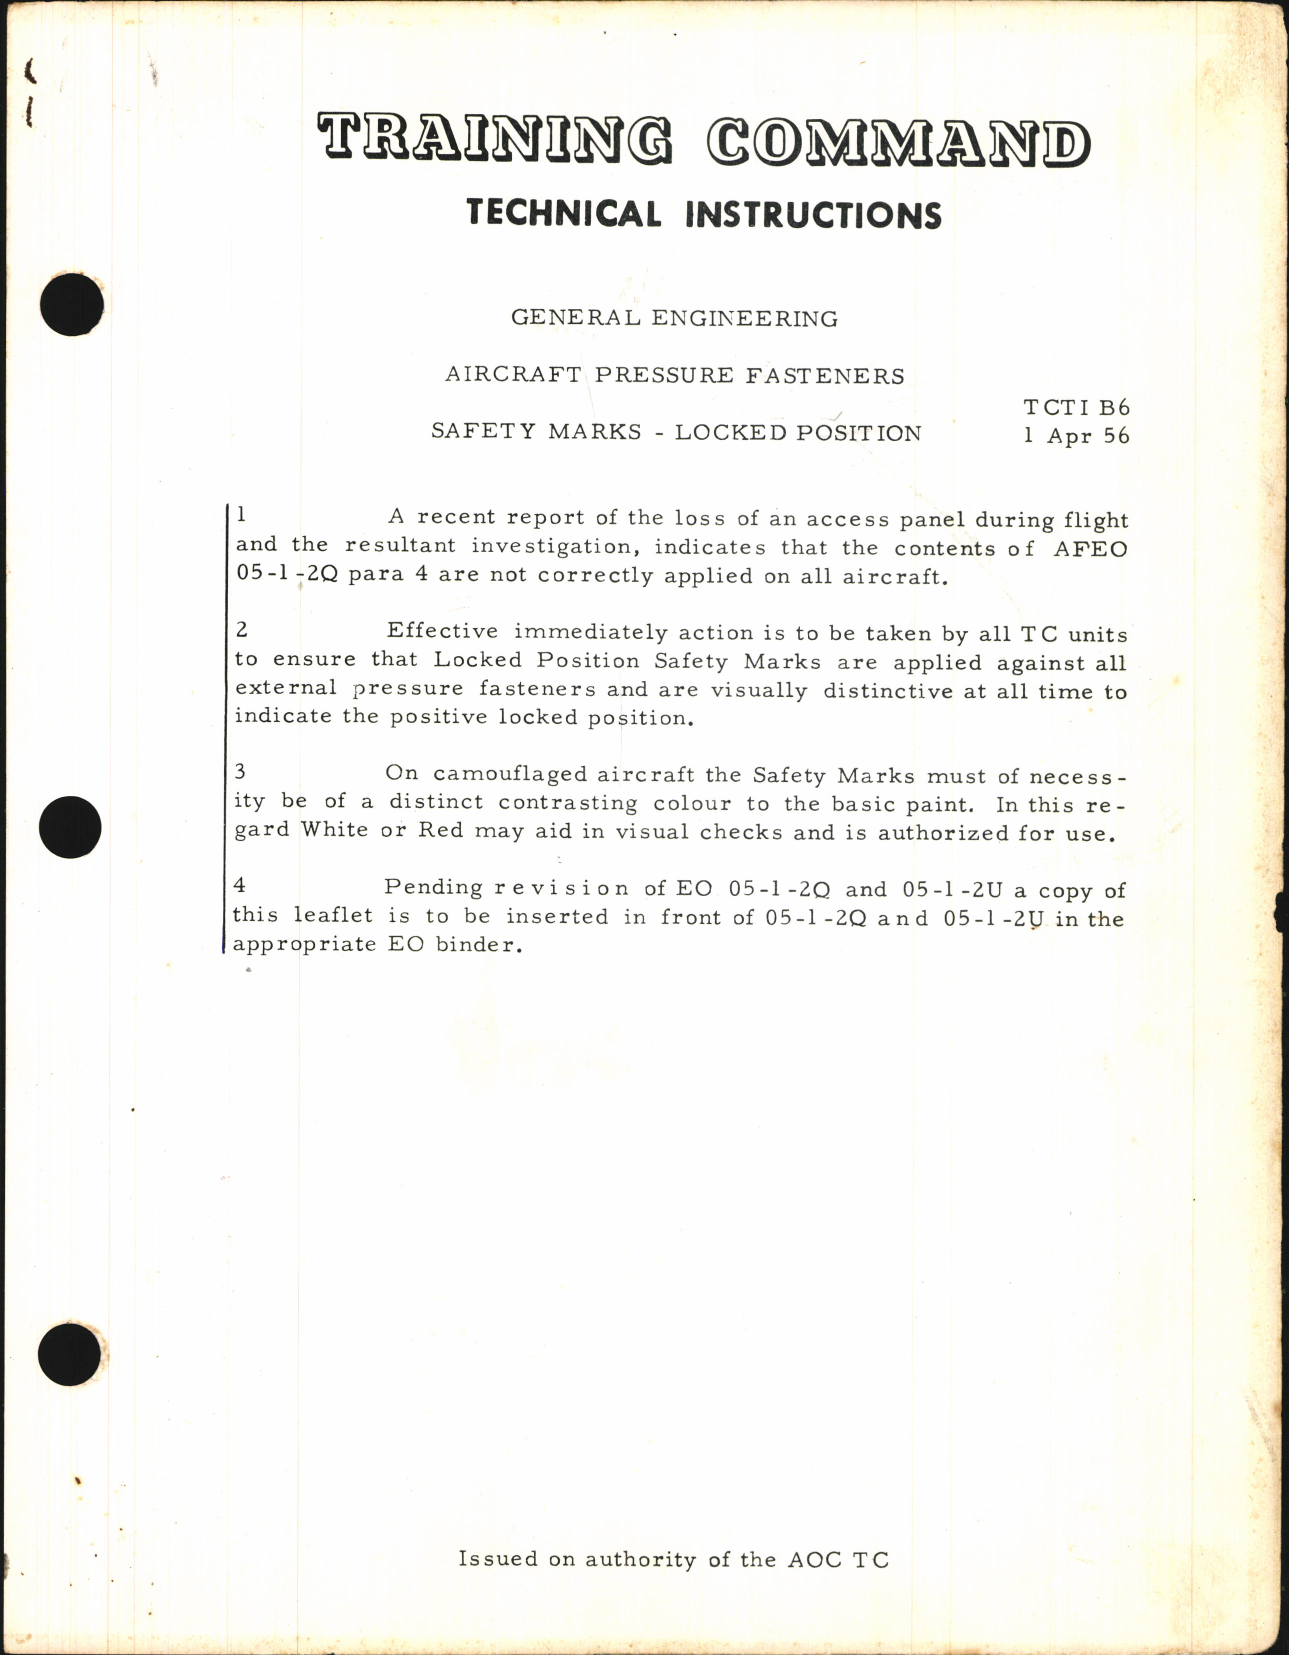 Sample page 1 from AirCorps Library document: Training Command Technical Instructions for Aircraft Pressure Fasteners Safety Marks - Locked Position 